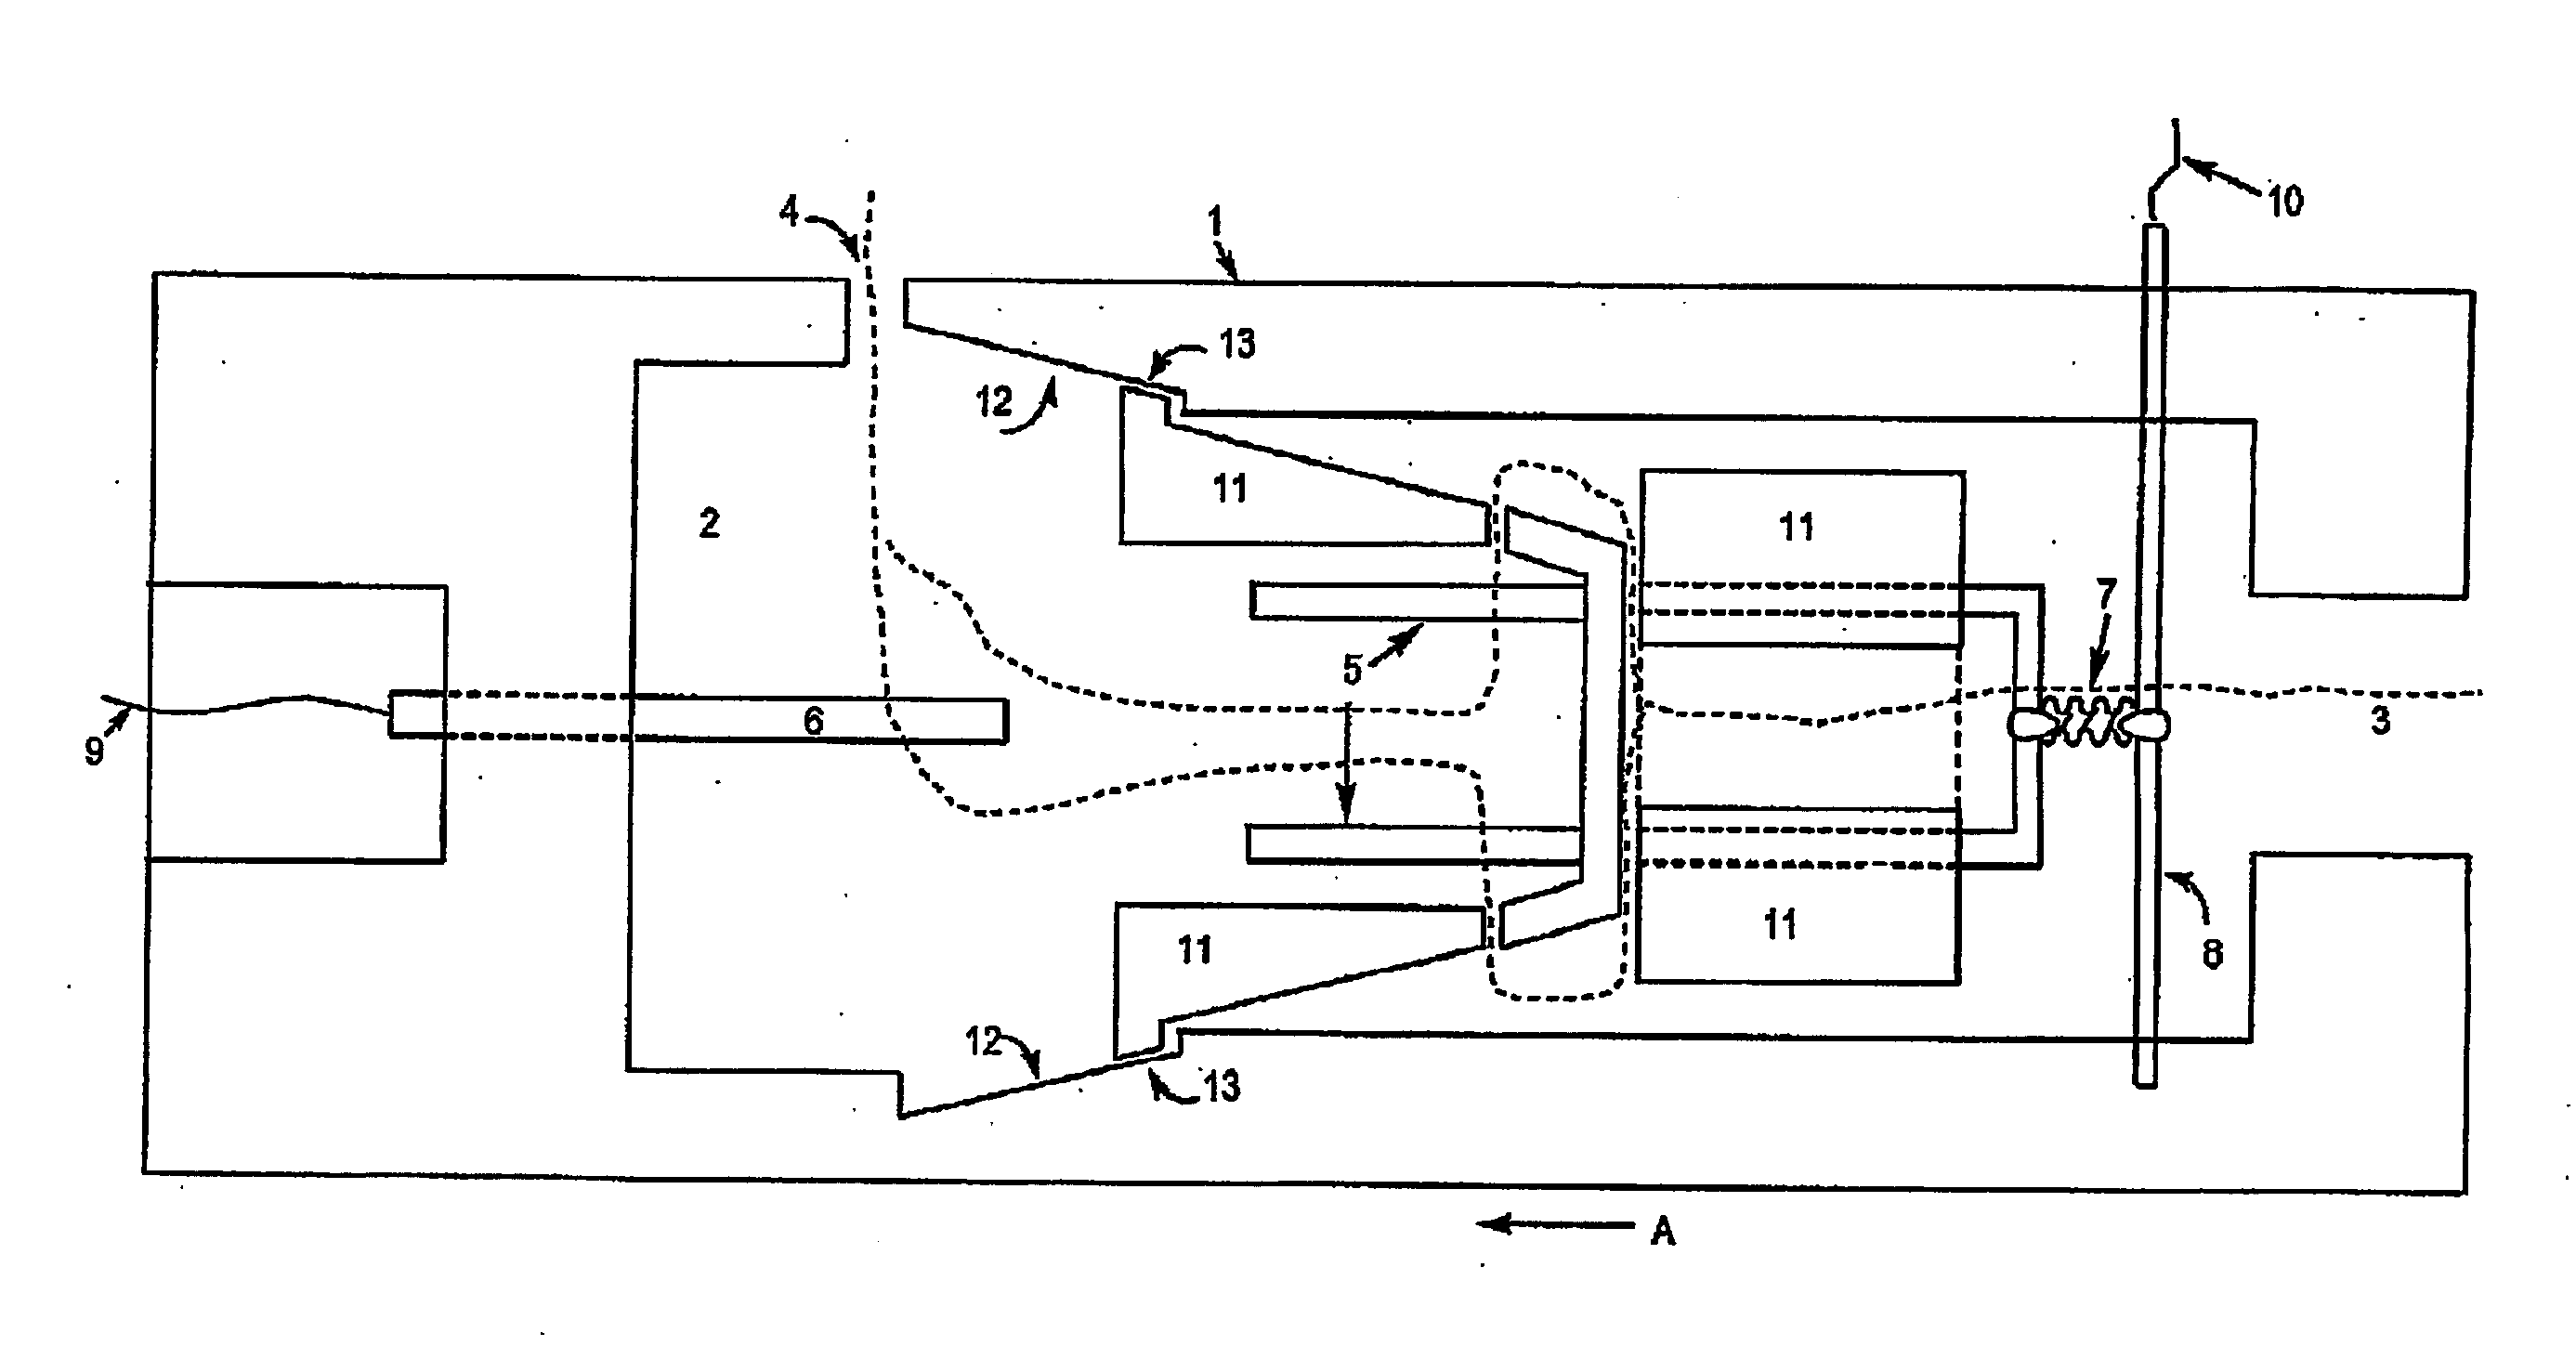 Method and apparatus for processing fluids